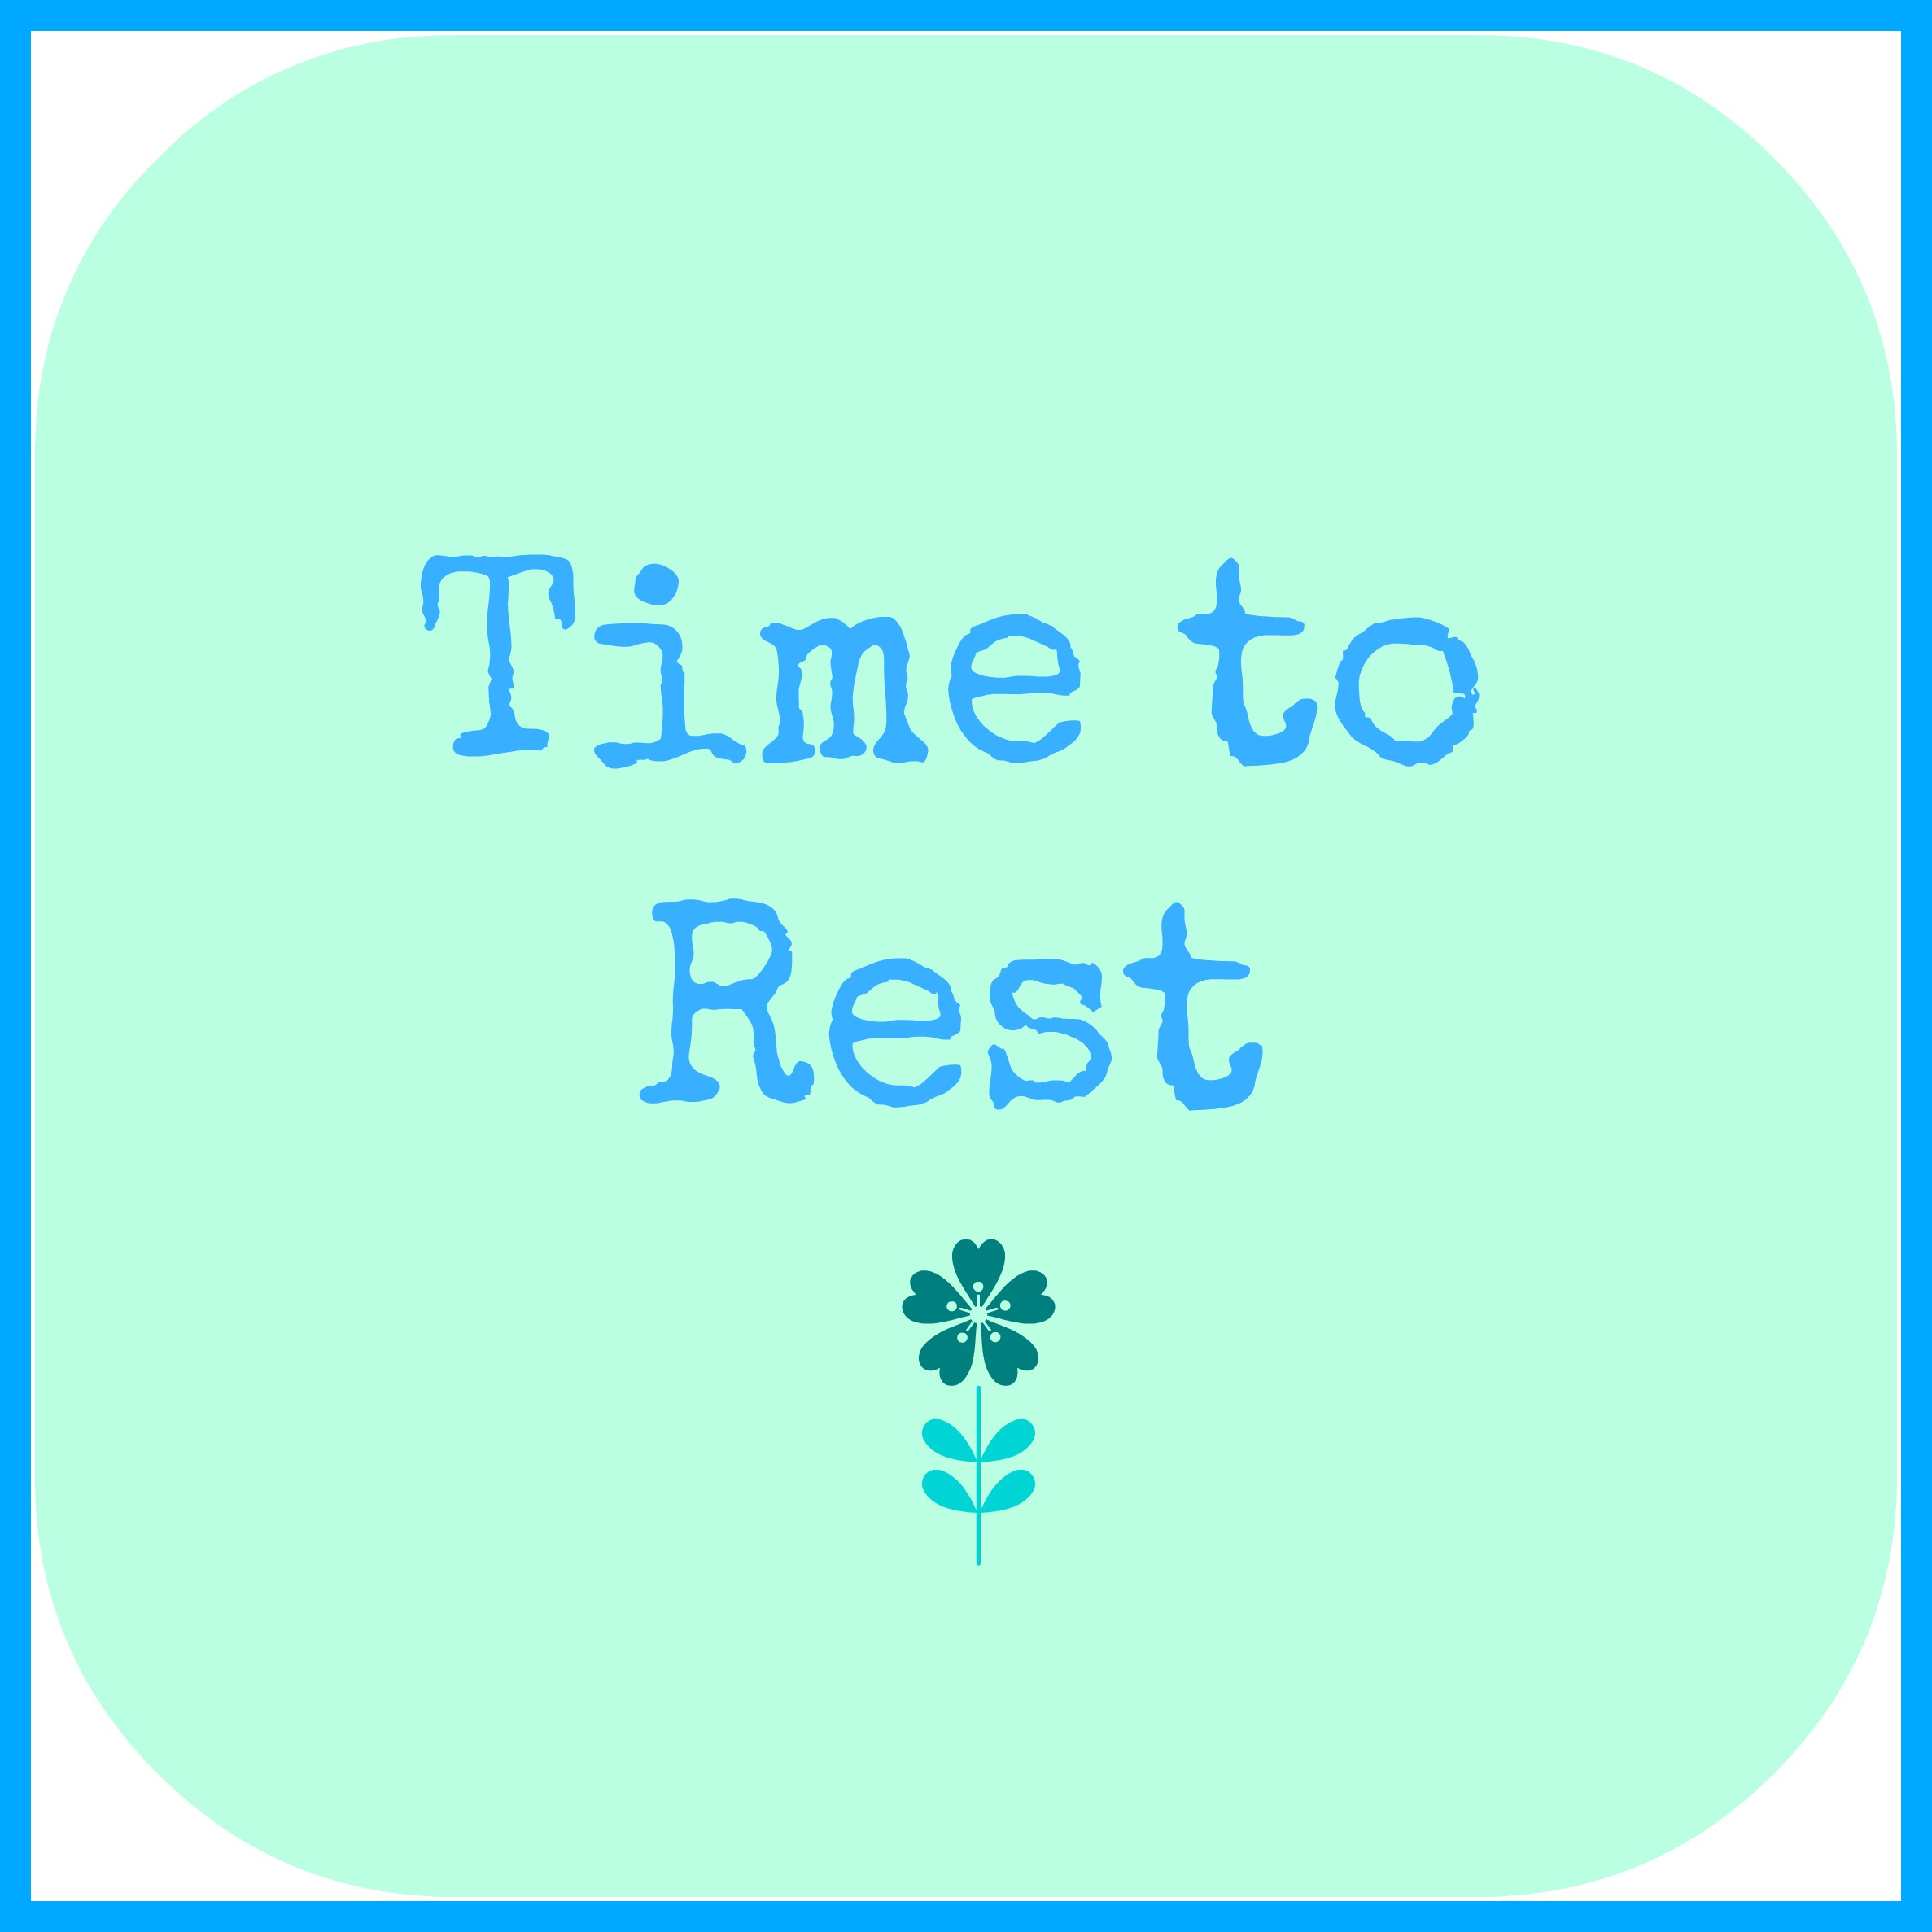 Have s rest. Rest time. Time to have a rest. Rest картинка. Let's have a rest.